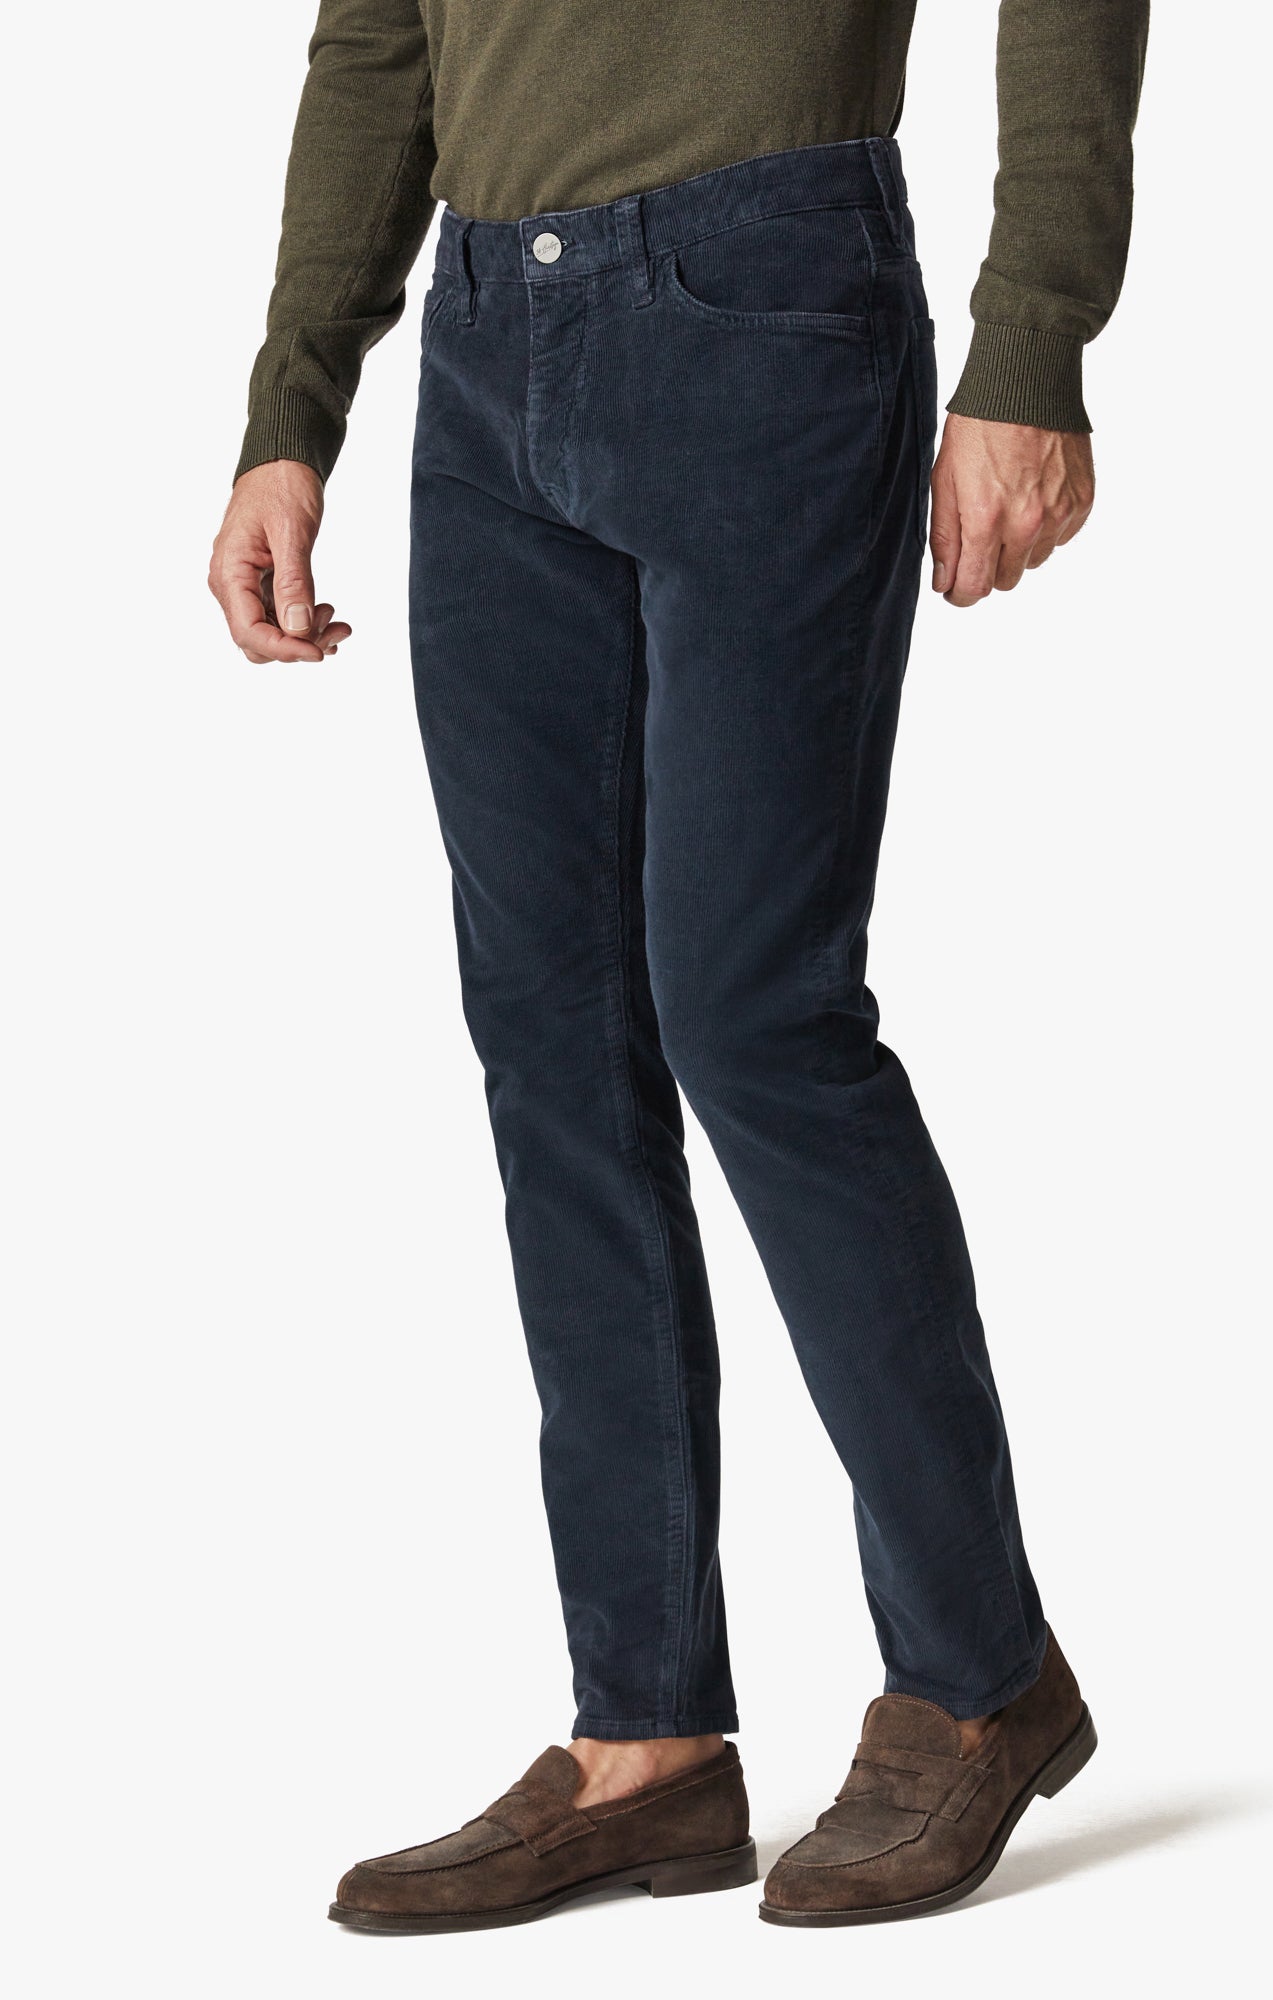 Cool Tapered Leg Pants In Navy Cord